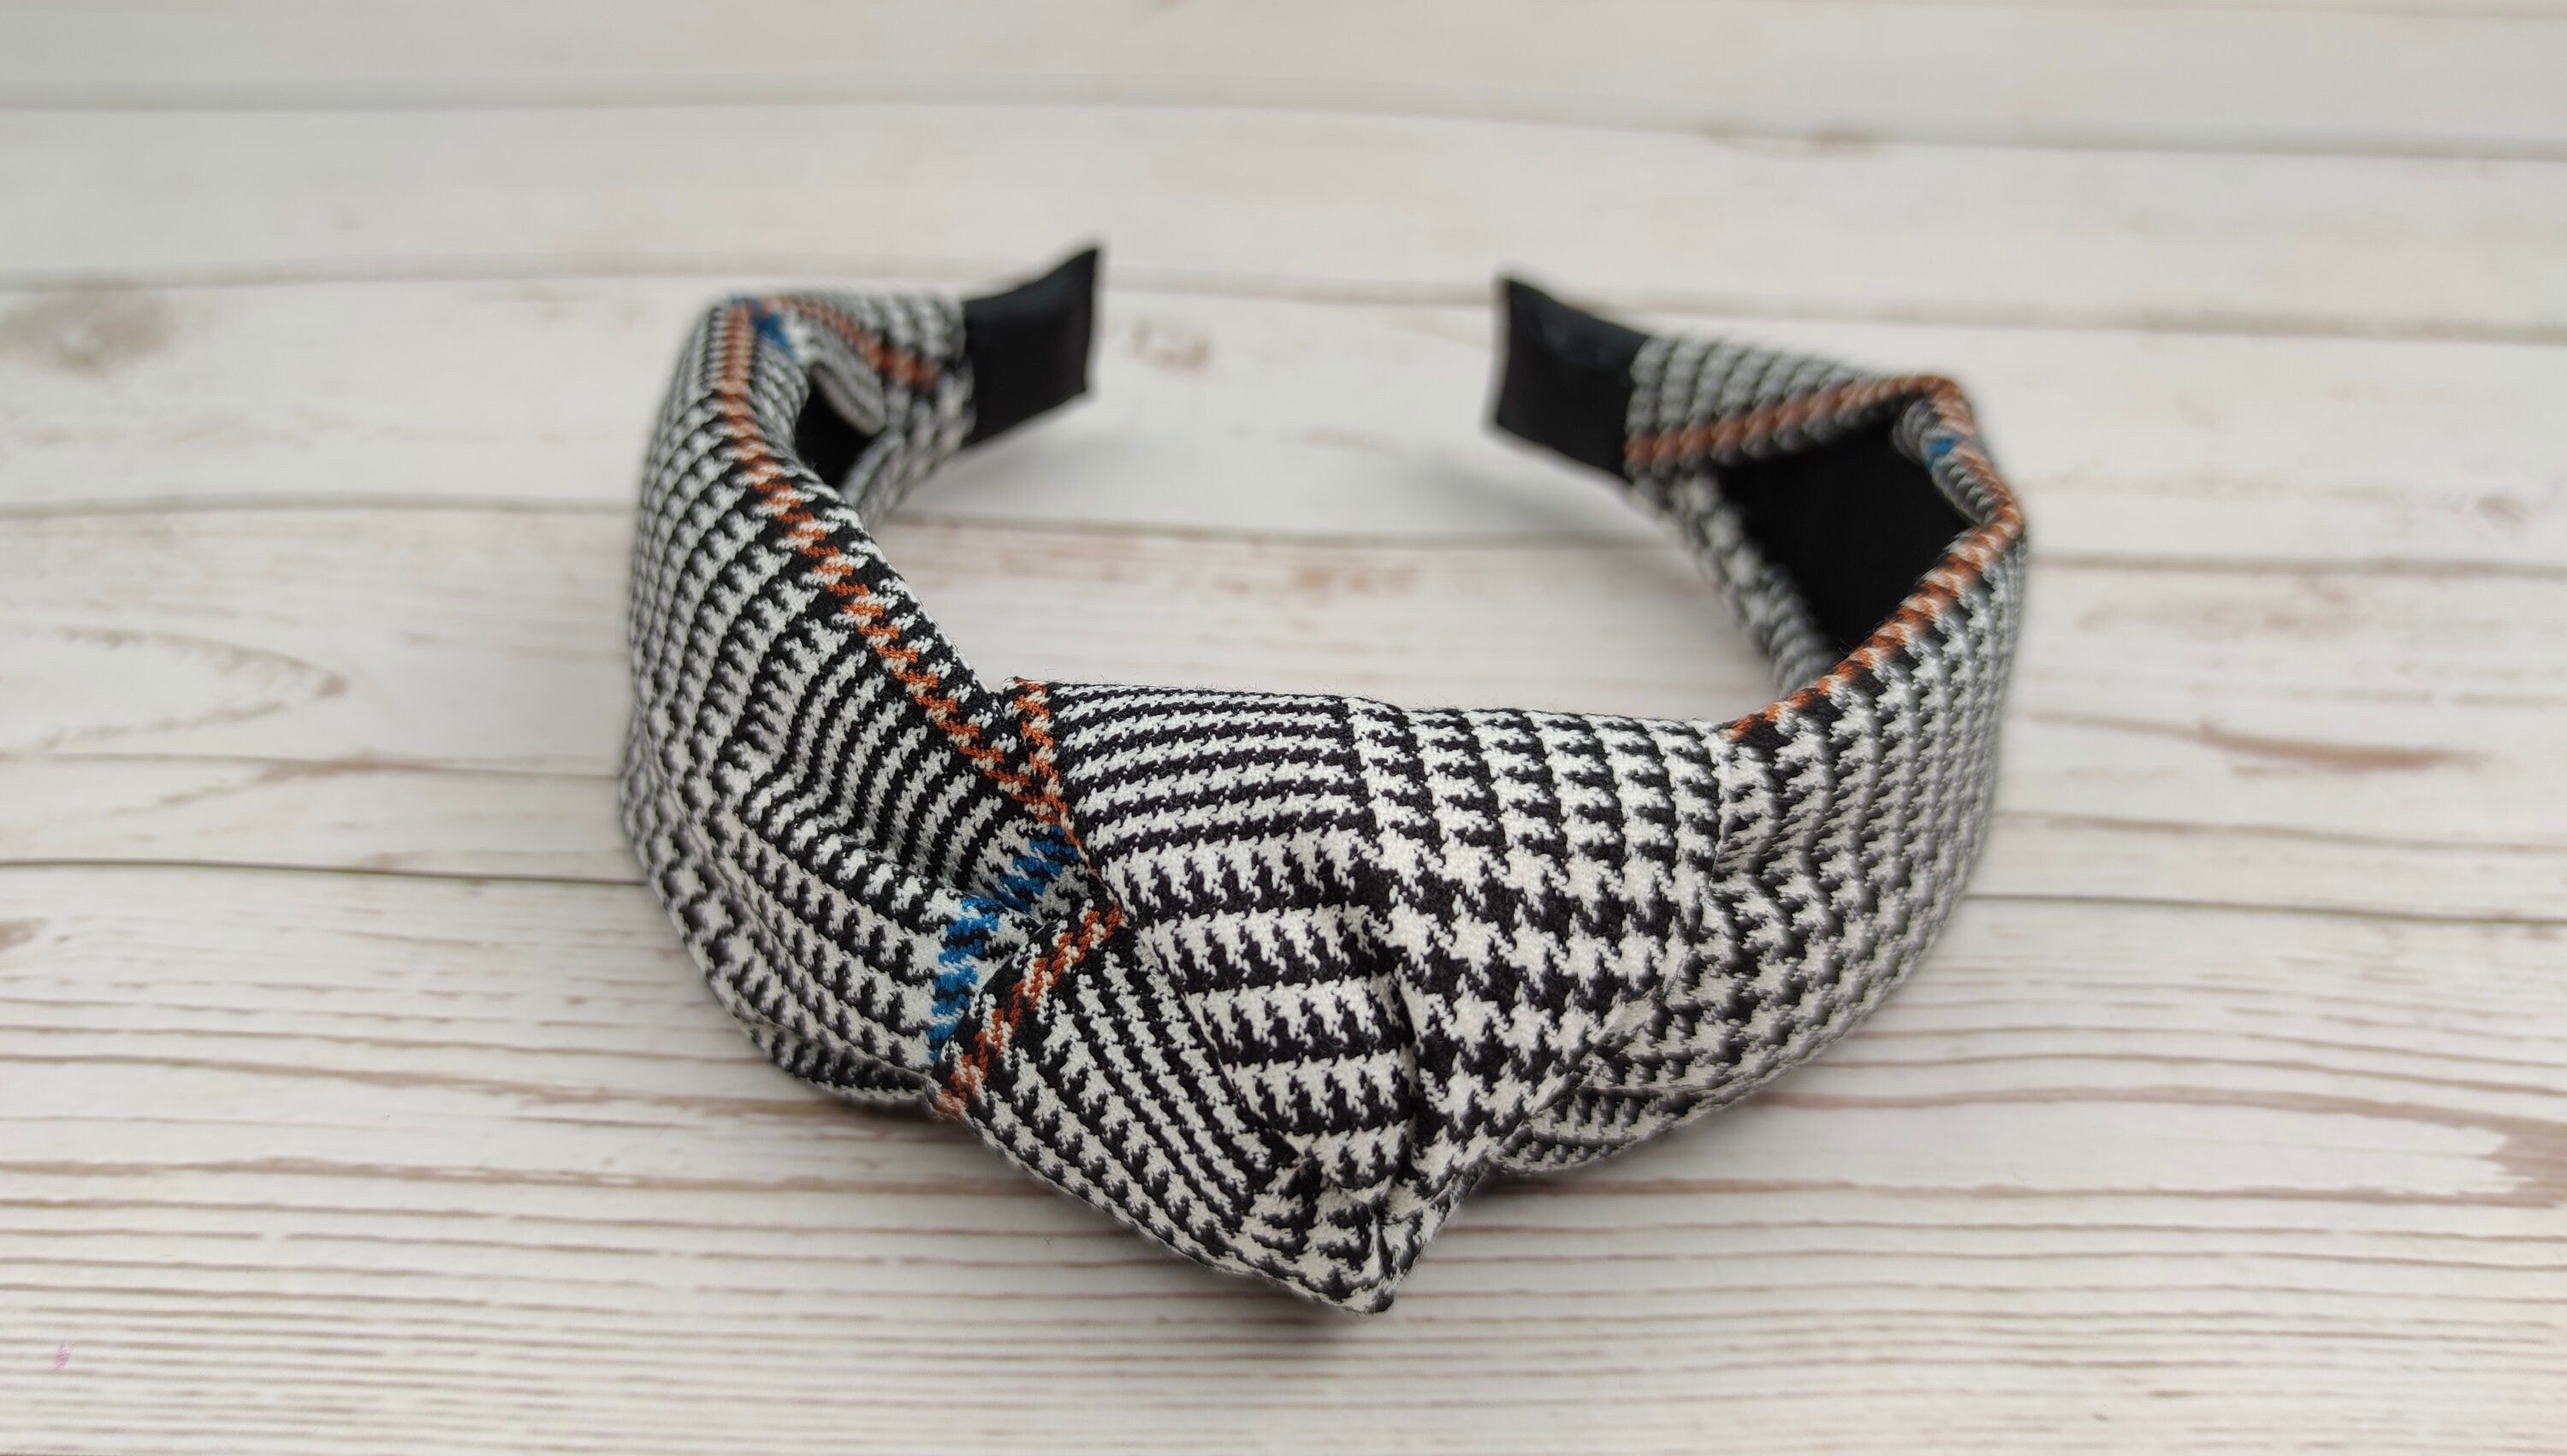 Stay comfortable and fashionable with this crepe-knotted headband in white and black, ideal for college or work.